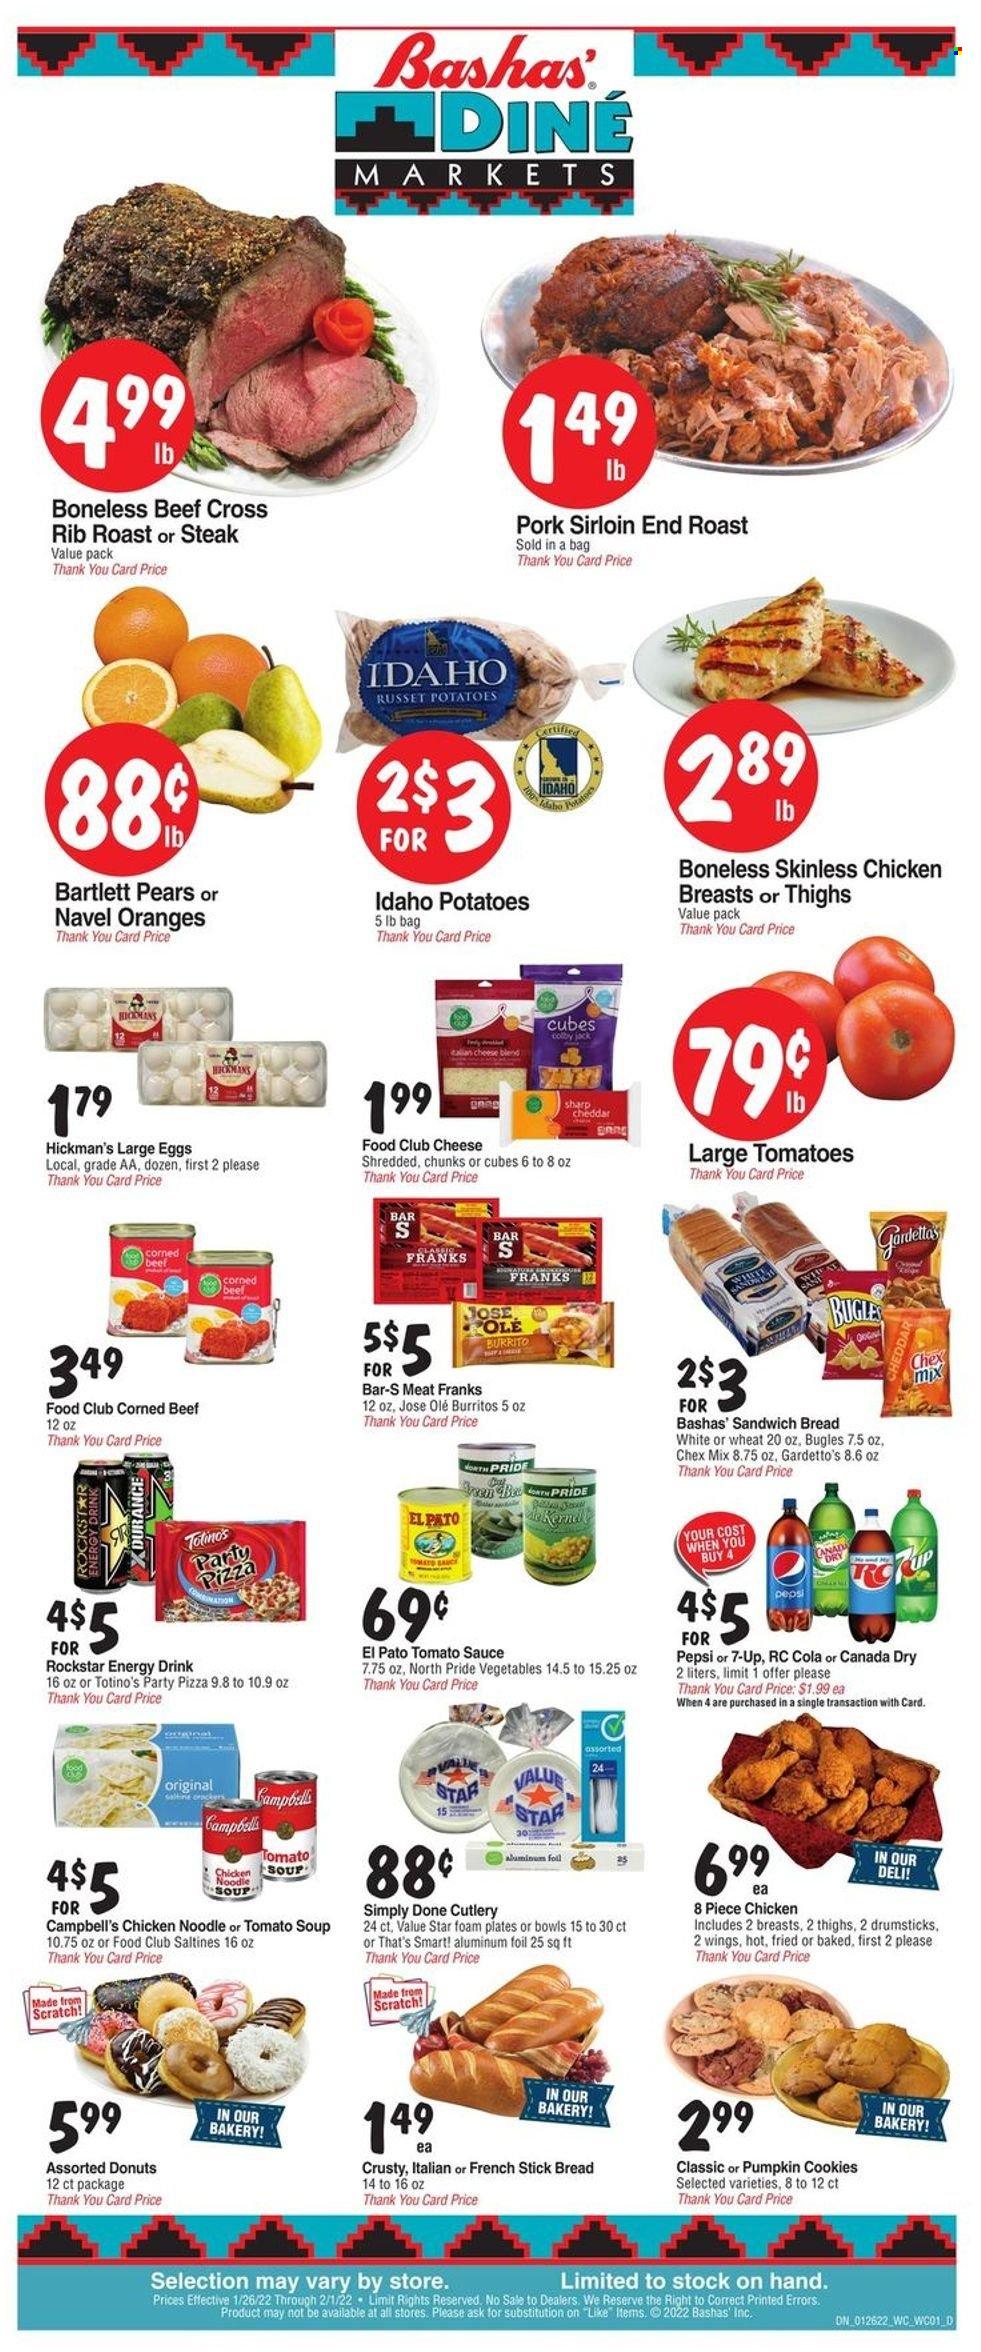 thumbnail - Bashas' Diné Markets Flyer - 01/26/2022 - 02/01/2022 - Sales products - Bartlett pears, bread, donut, russet potatoes, potatoes, pears, oranges, Campbell's, tomato soup, pizza, chicken soup, soup, sauce, noodles cup, burrito, noodles, corned beef, large eggs, cookies, saltines, Chex Mix, tomato sauce, Canada Dry, Pepsi, energy drink, 7UP, Rockstar, beef meat, steak, pork loin, navel oranges. Page 1.